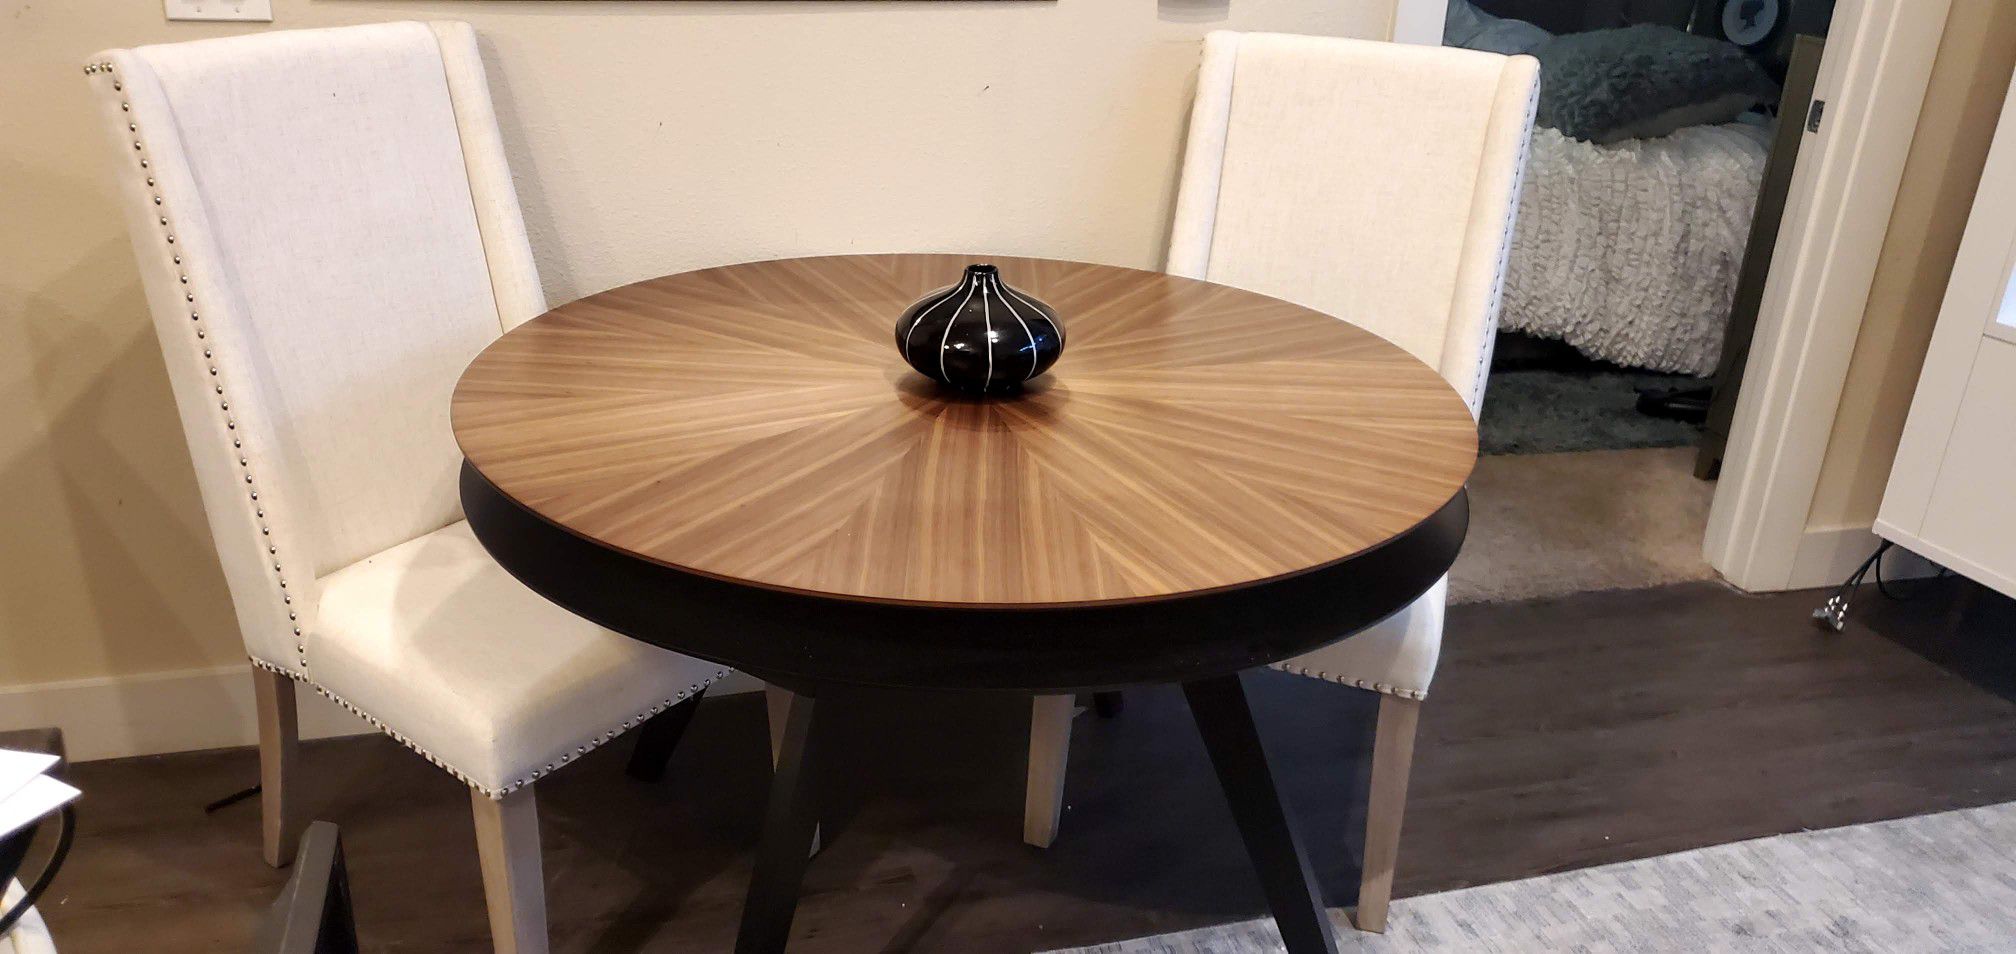 47" Round 2 layer Dining table. GREAT for Family Game Night (Monopoly money, poker chips, or plate place settings) - orig $600